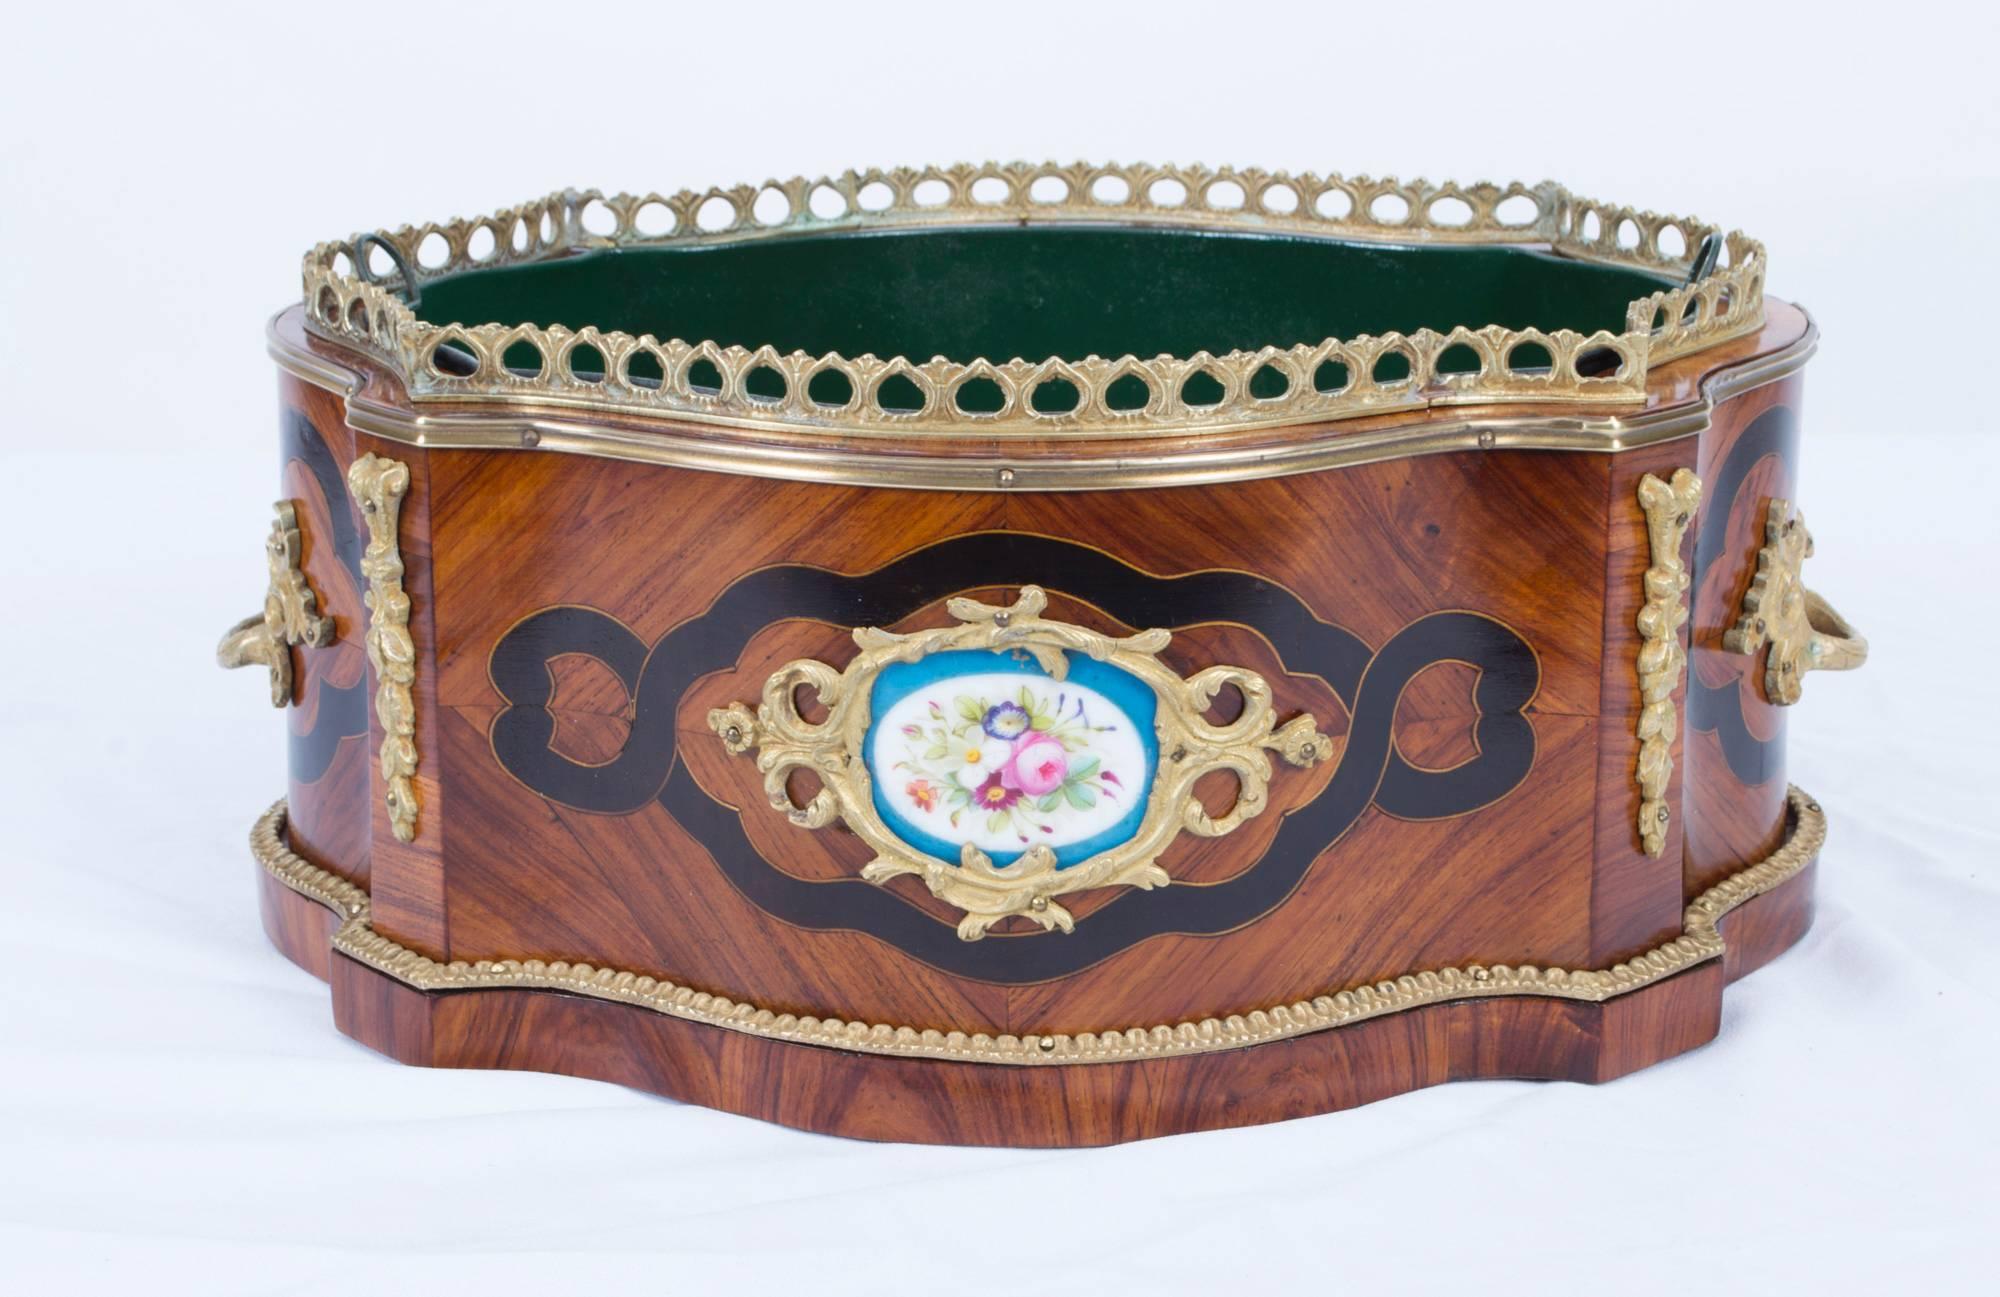 This is a beautiful antique French ormolu and Sevres porcelain mounted, kingwood jardiniere, circa 1870.

The jardiniere is serpentine in shape with ormolu mounts enclosing enchanting floral hand painted Sevres porcelain plaques, ebonised banding